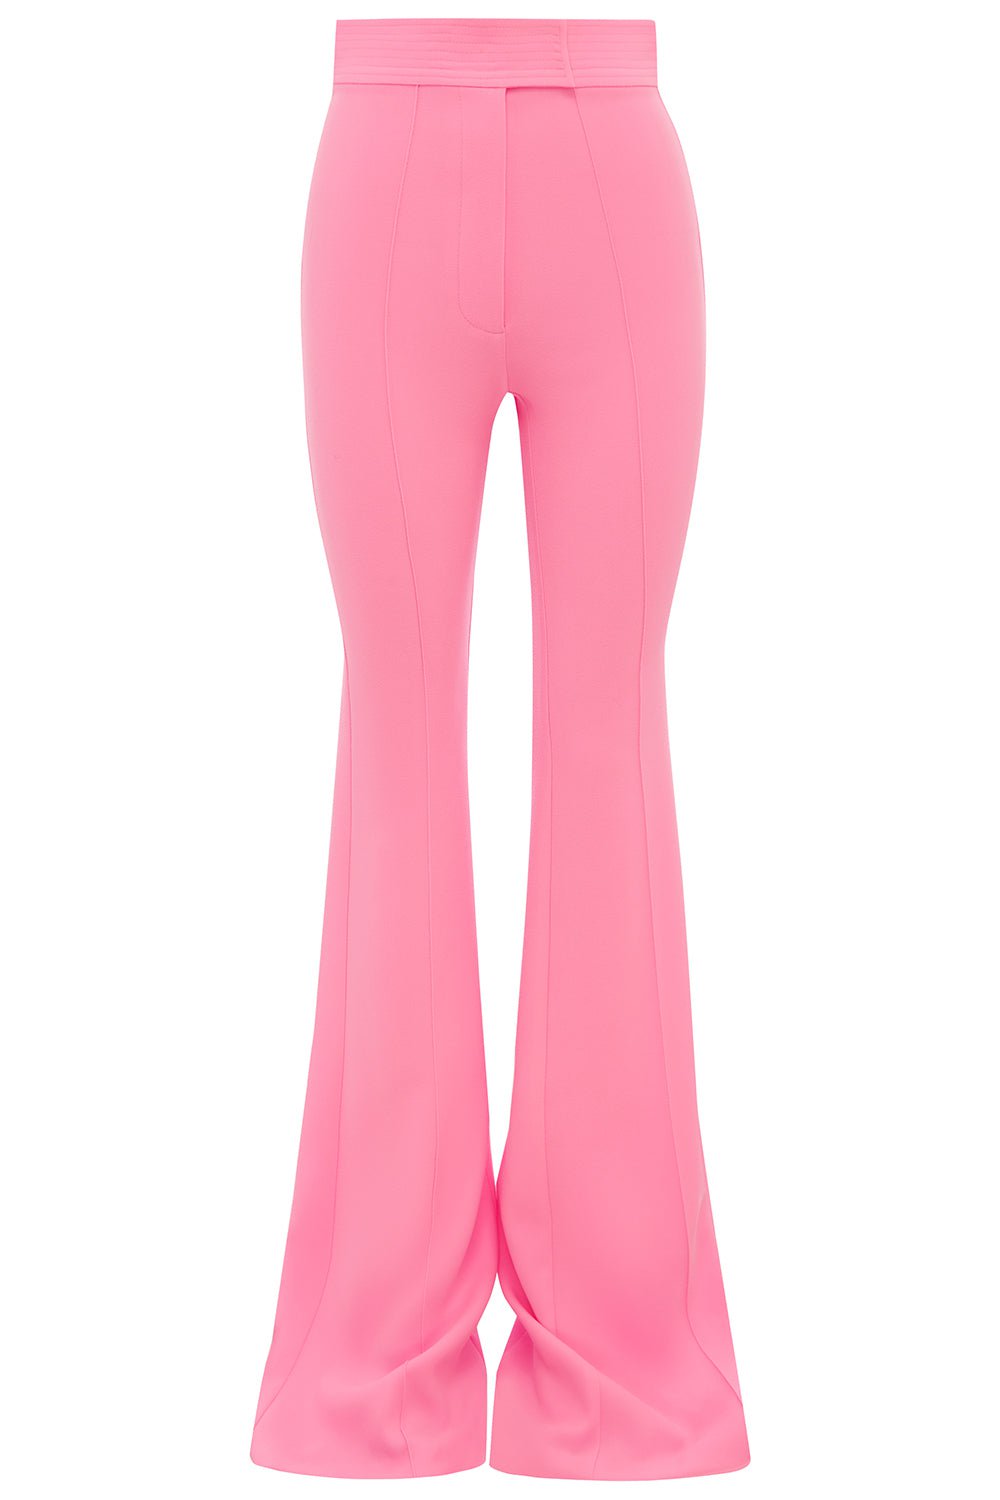 Marden Pant - Pink